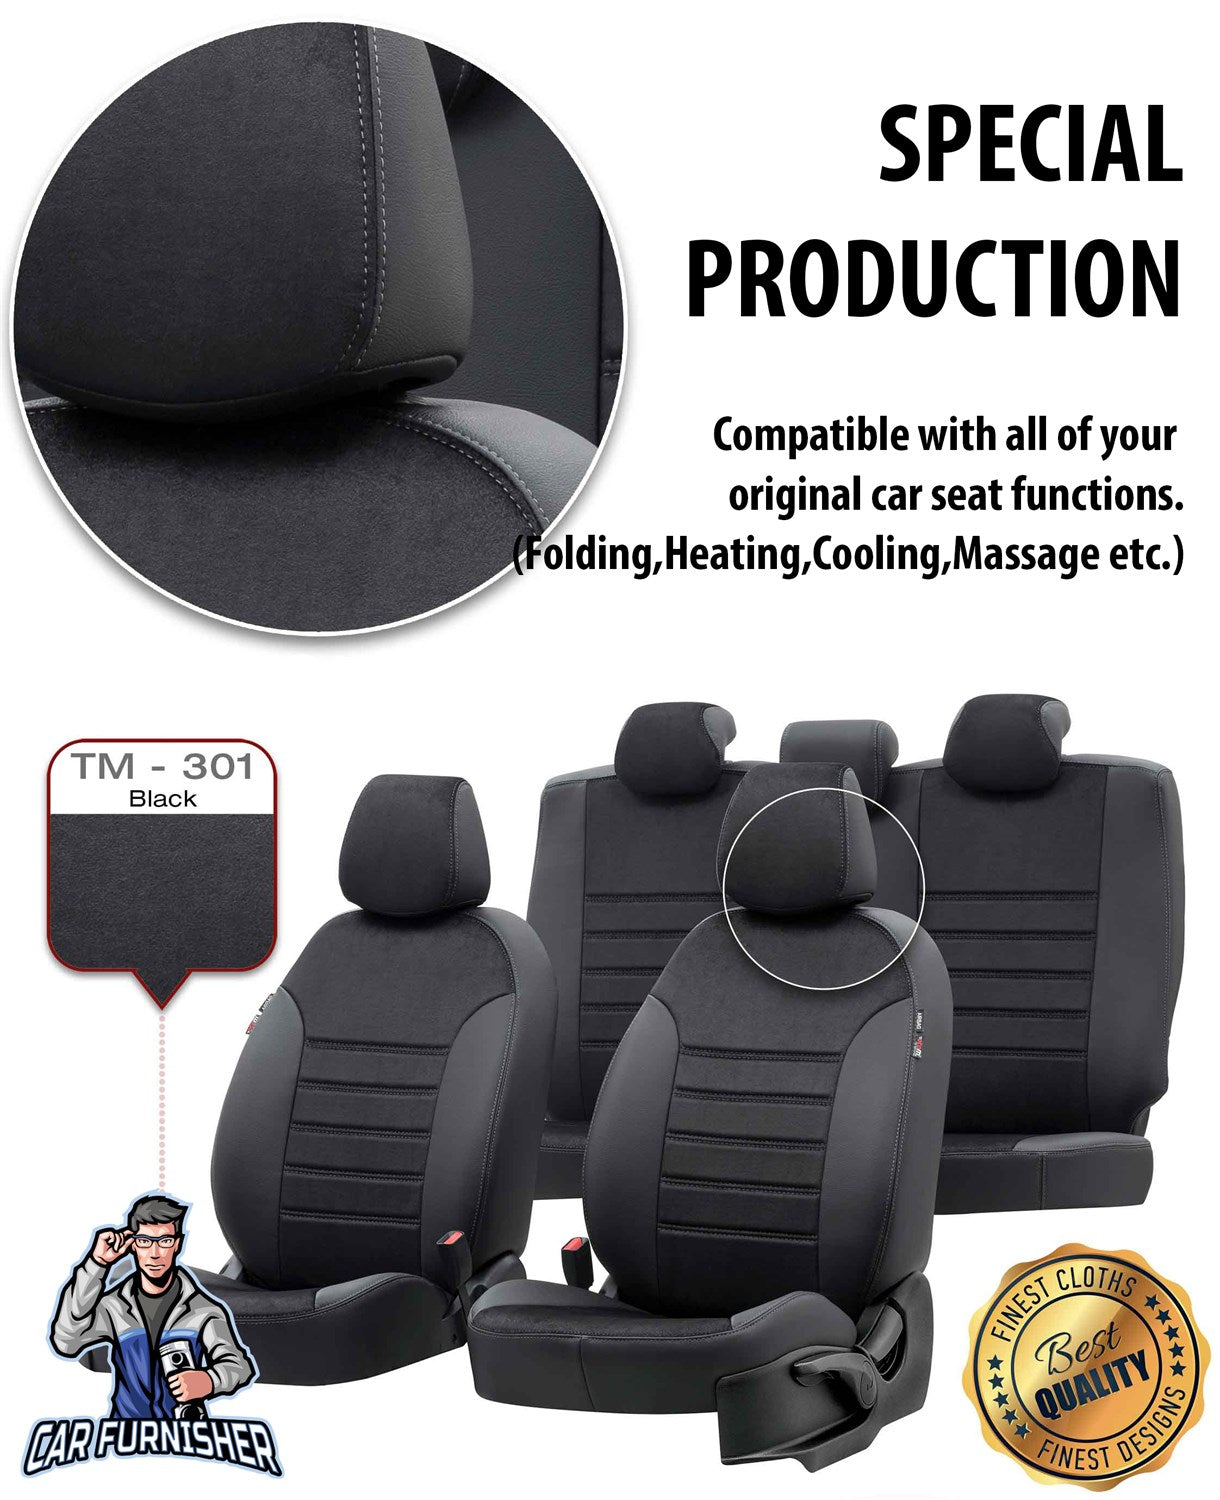 Mercedes E Class Seat Covers Milano Suede Design Smoked Black Leather & Suede Fabric